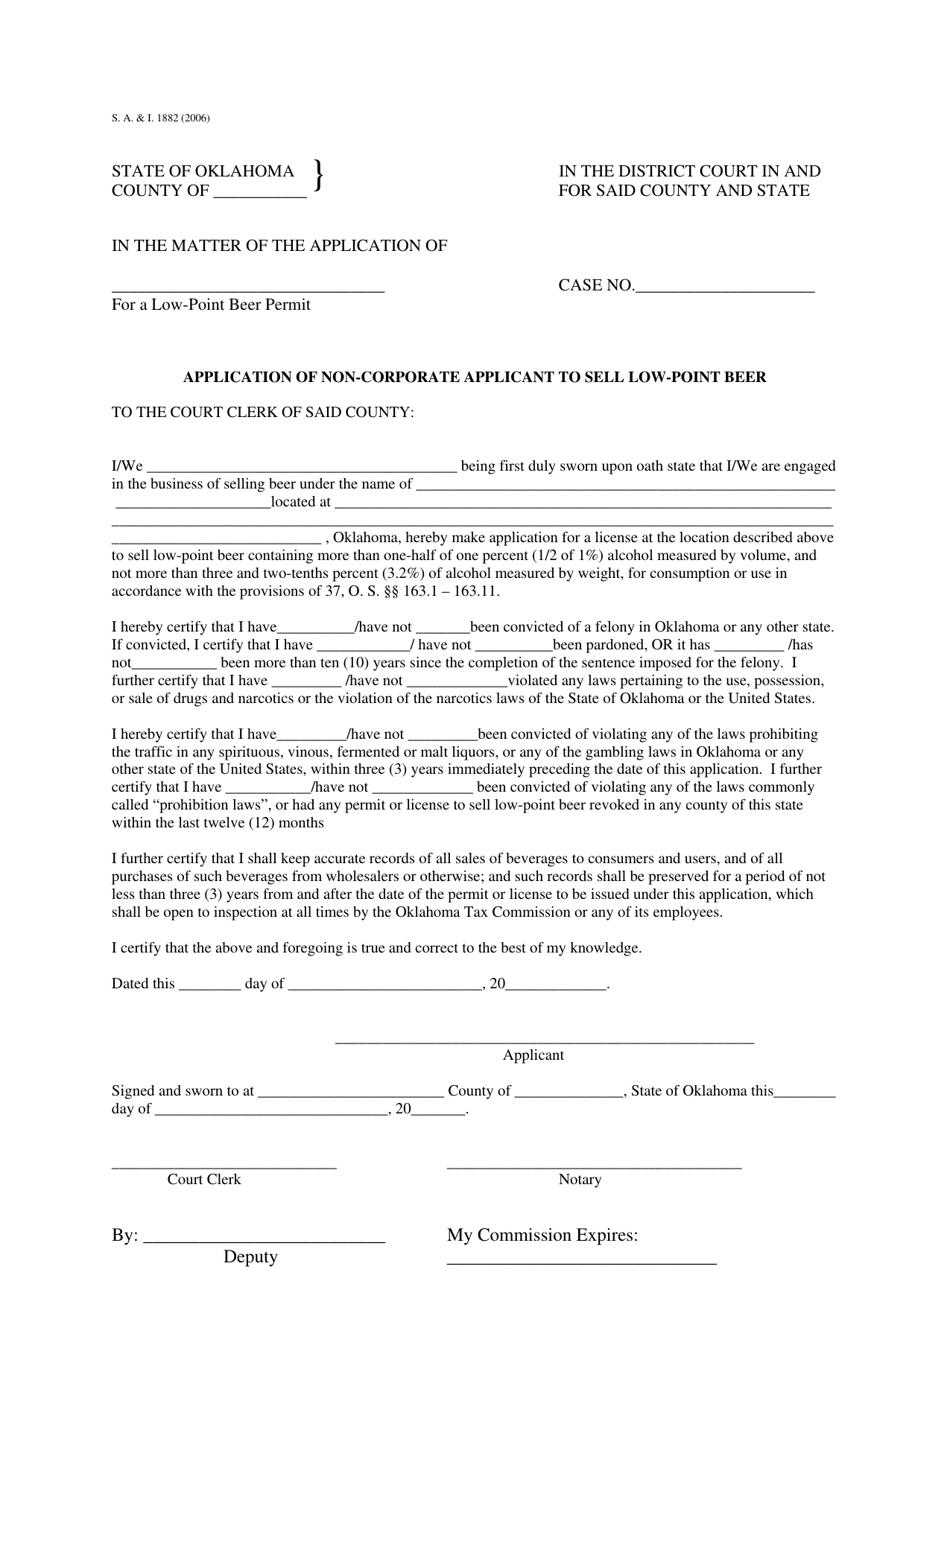 Form S.A. I.1882 Application of Non-corporate Applicant to Sell Low-Point Beer - Oklahoma, Page 1